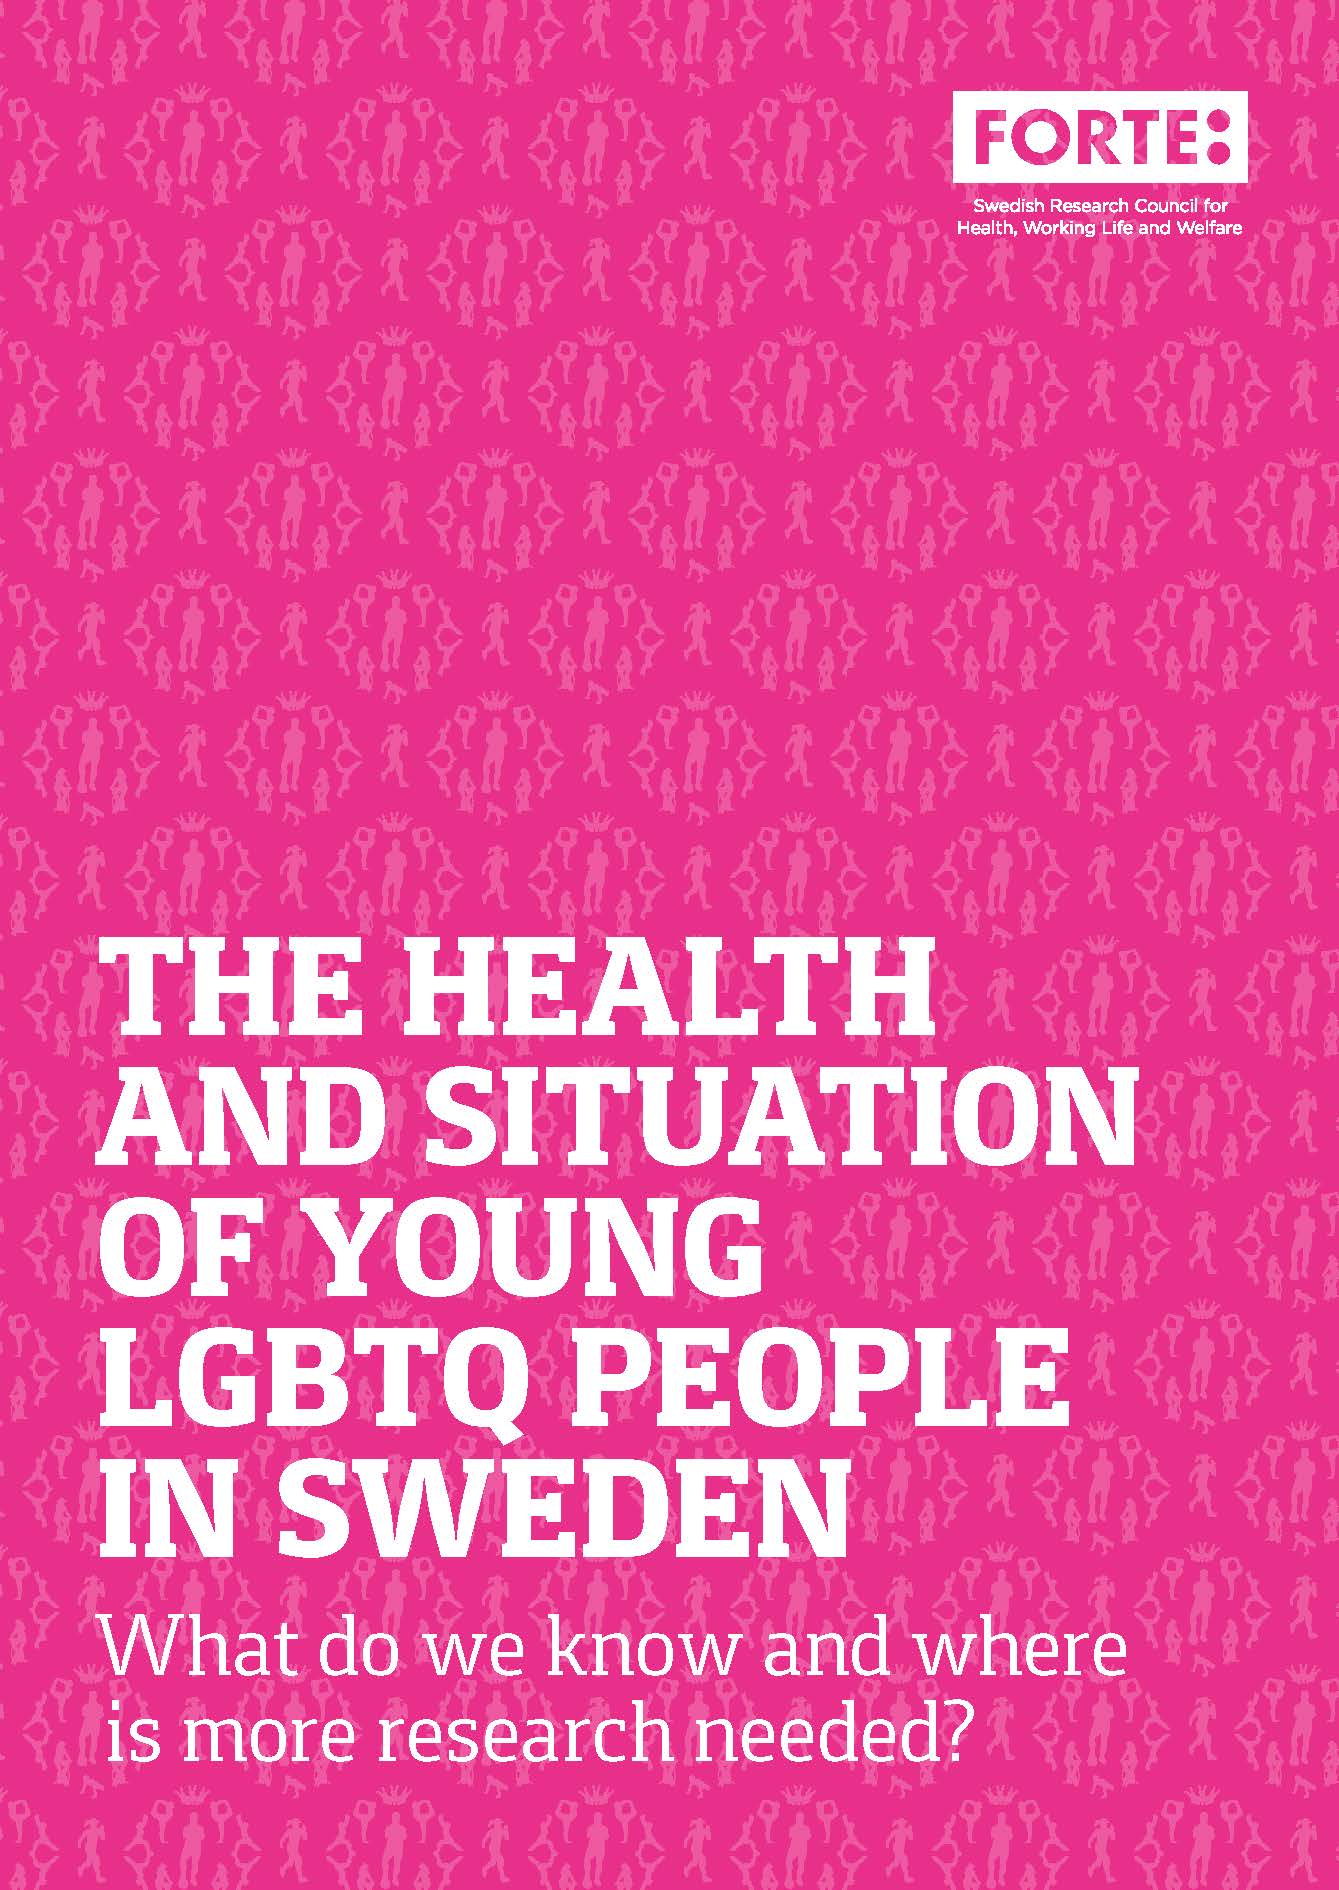 The health and situation of young LGBTQ people in Sweden – What do we know and where is more research needed?